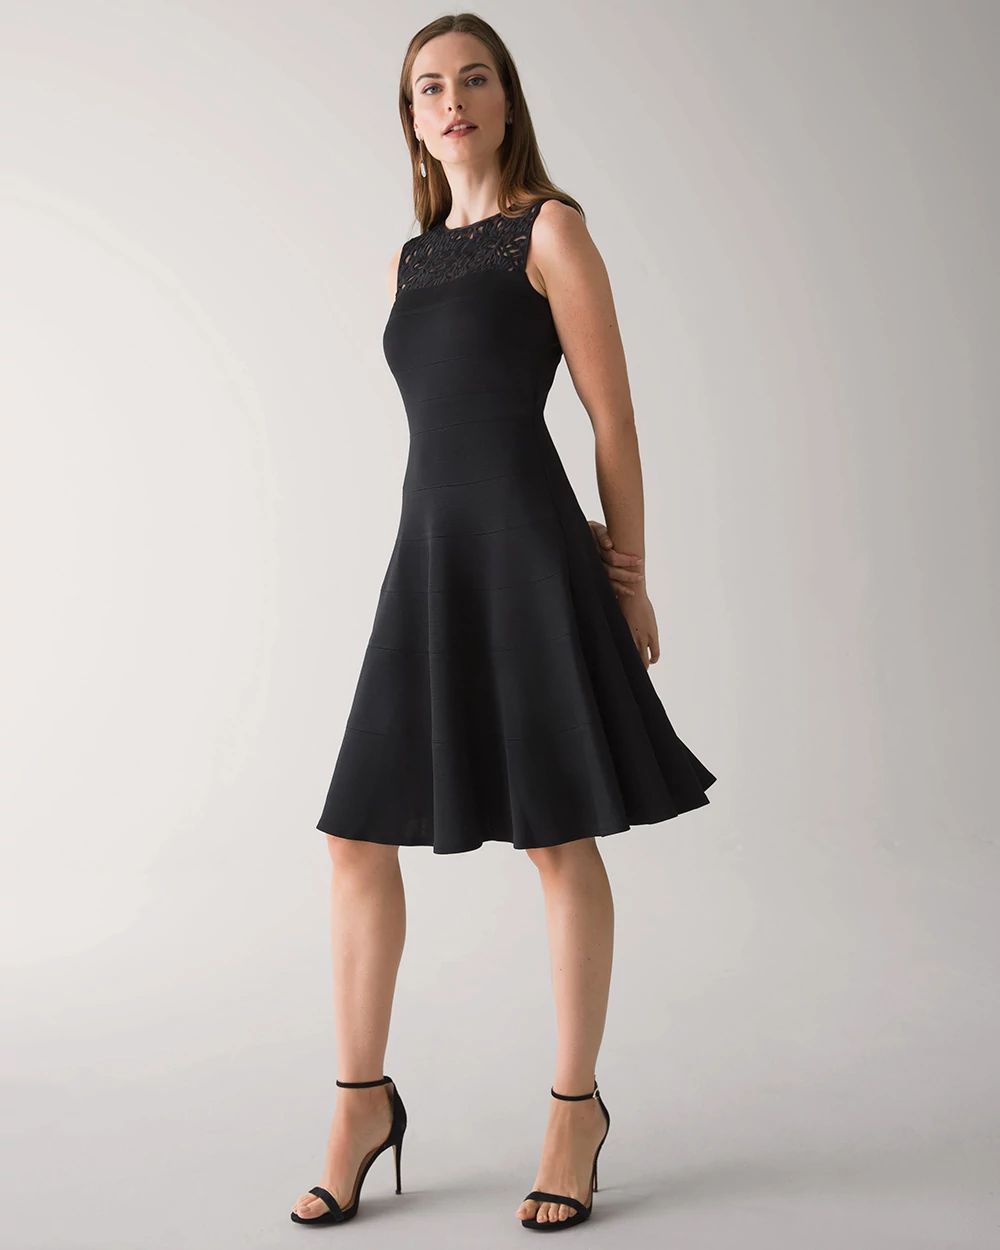 Petite Lace Yoke Fit and Flare Dress click to view larger image.